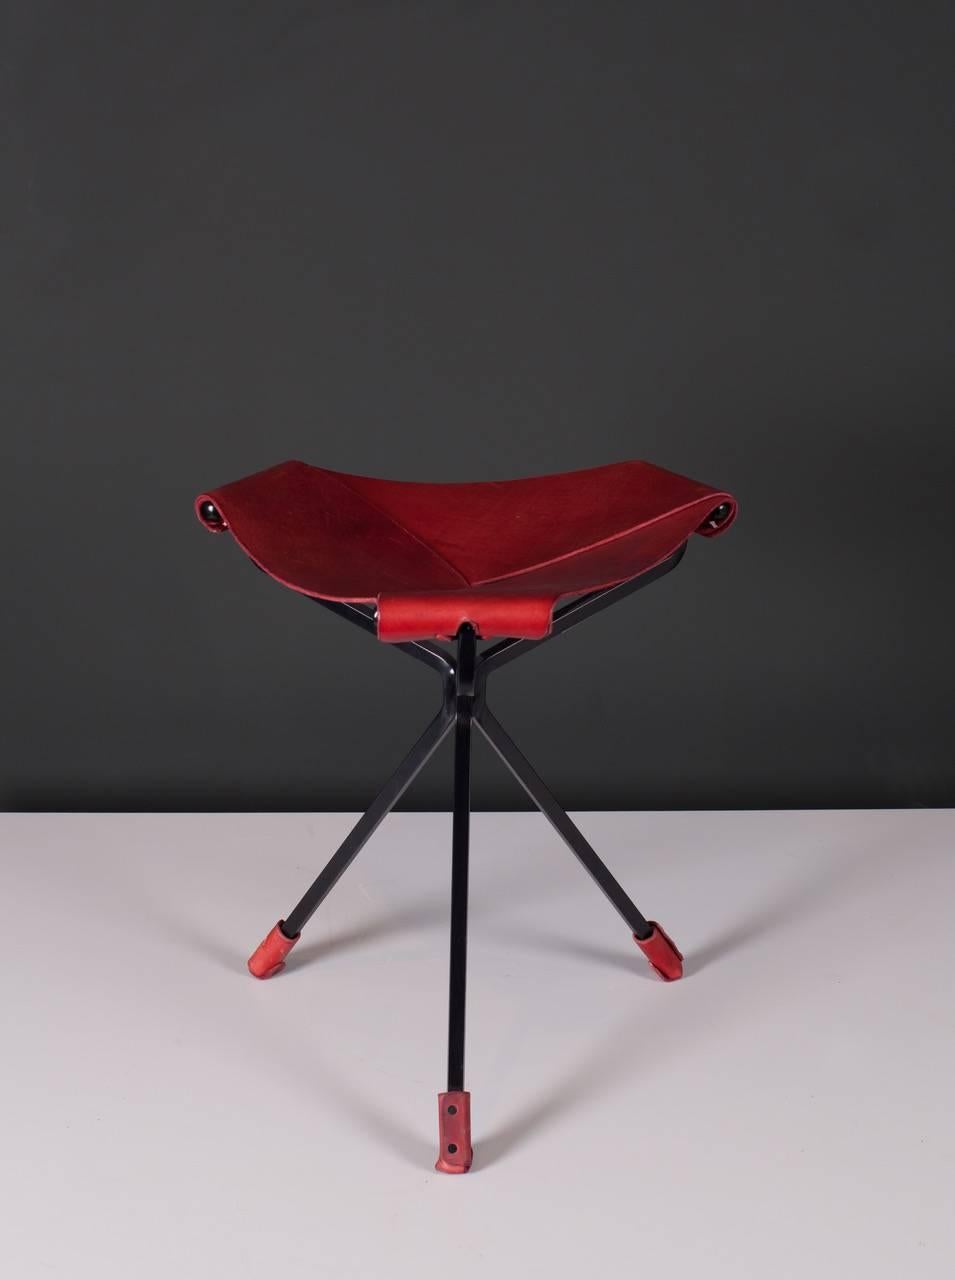 Stool with red Latigo leather on a black steel base. A Californian icon!